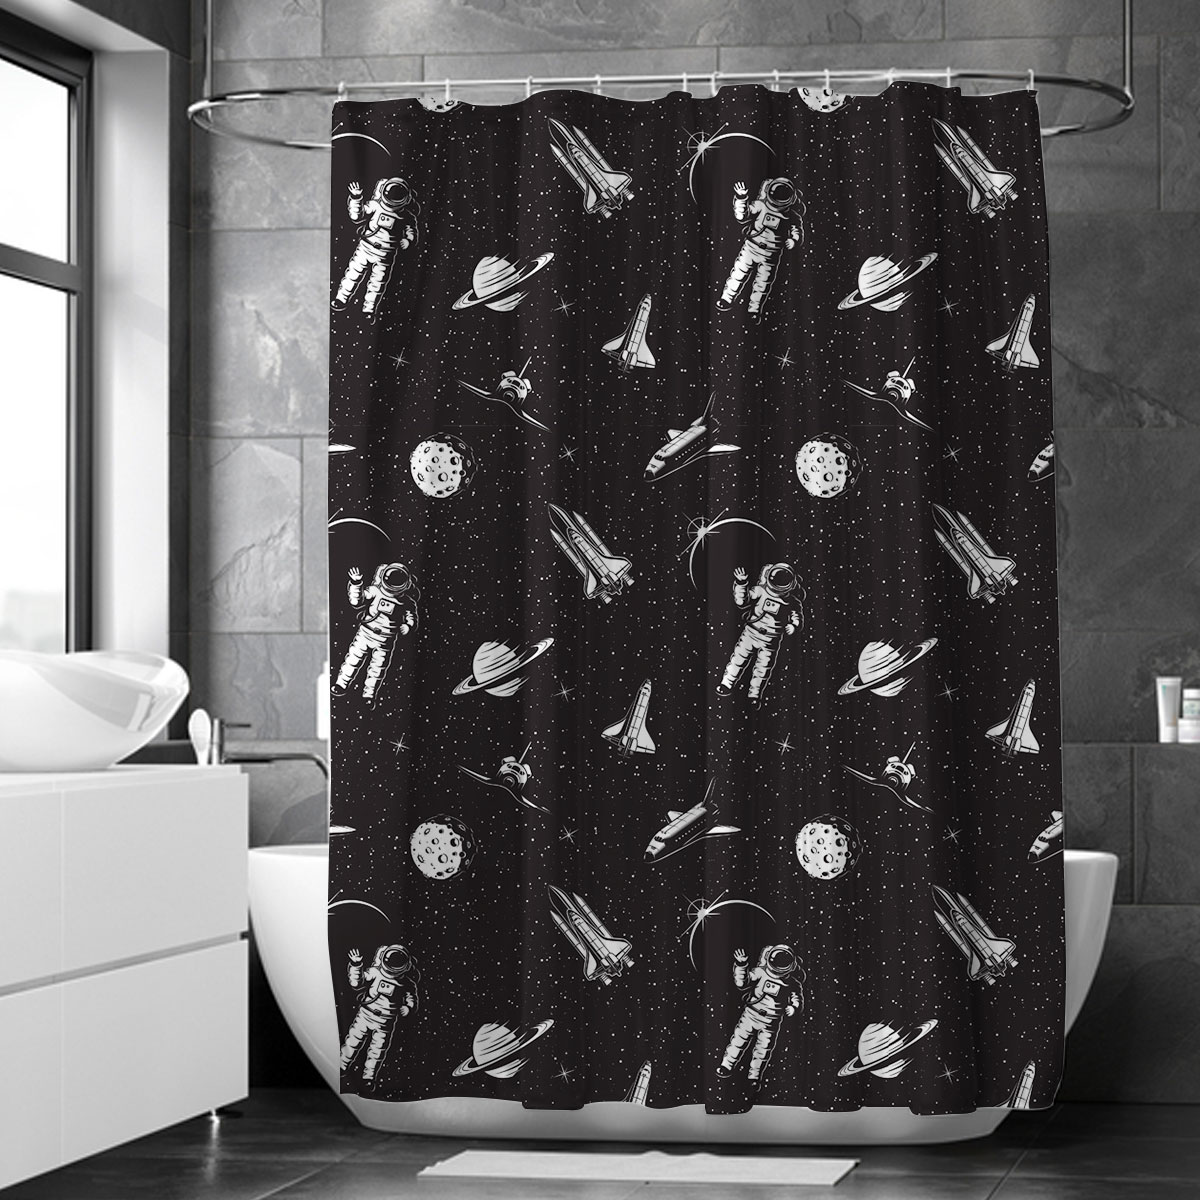 3D Black And White Astronaut Shower Curtain